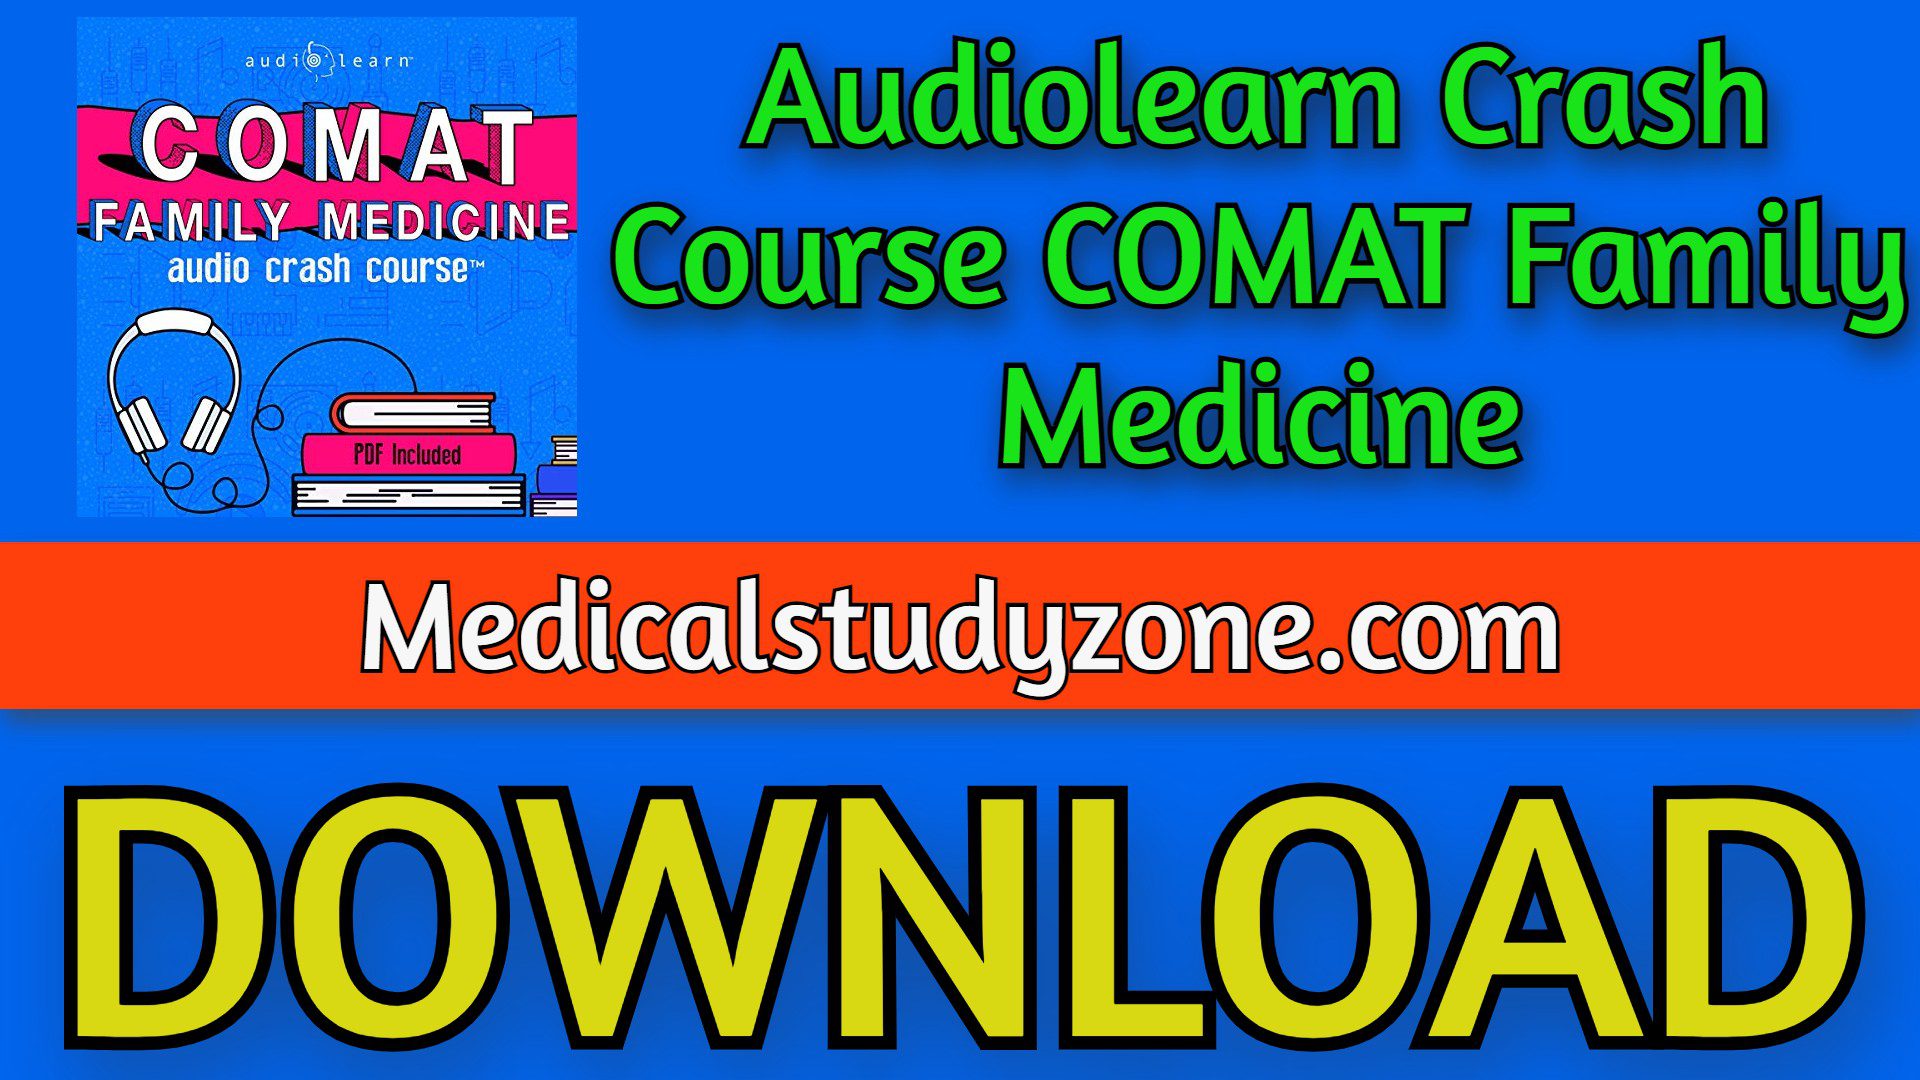 Audiolearn Crash Course COMAT Family Medicine 2021 Free Download